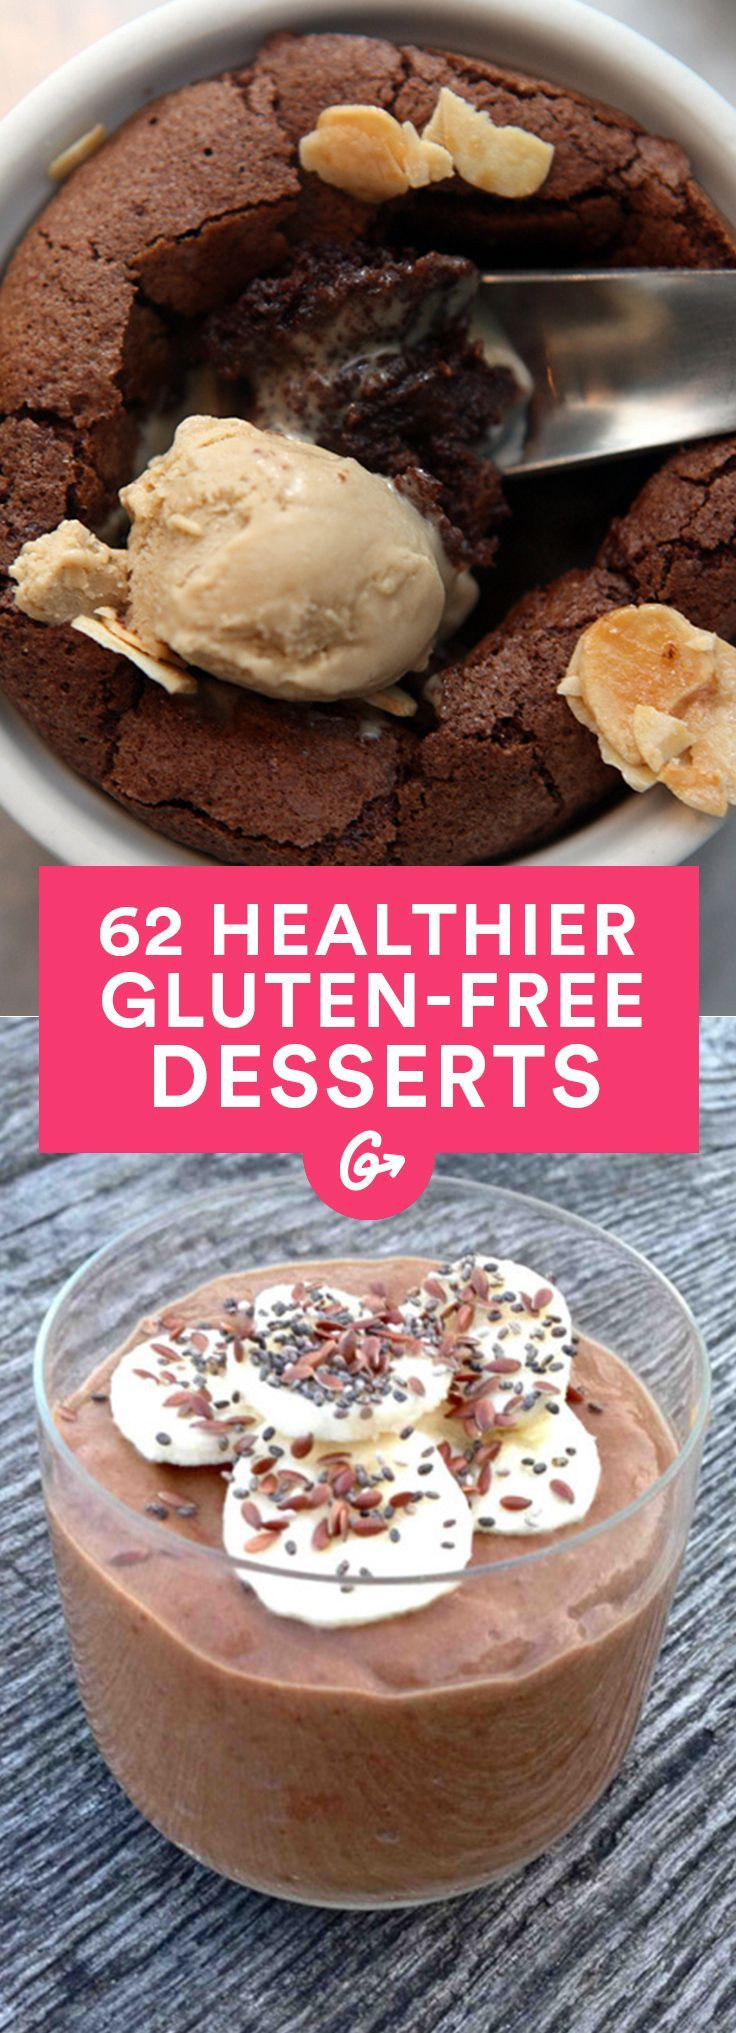 Healthy Gluten Free Desserts
 Glutenfree Healthy recipes and Saying goodbye on Pinterest